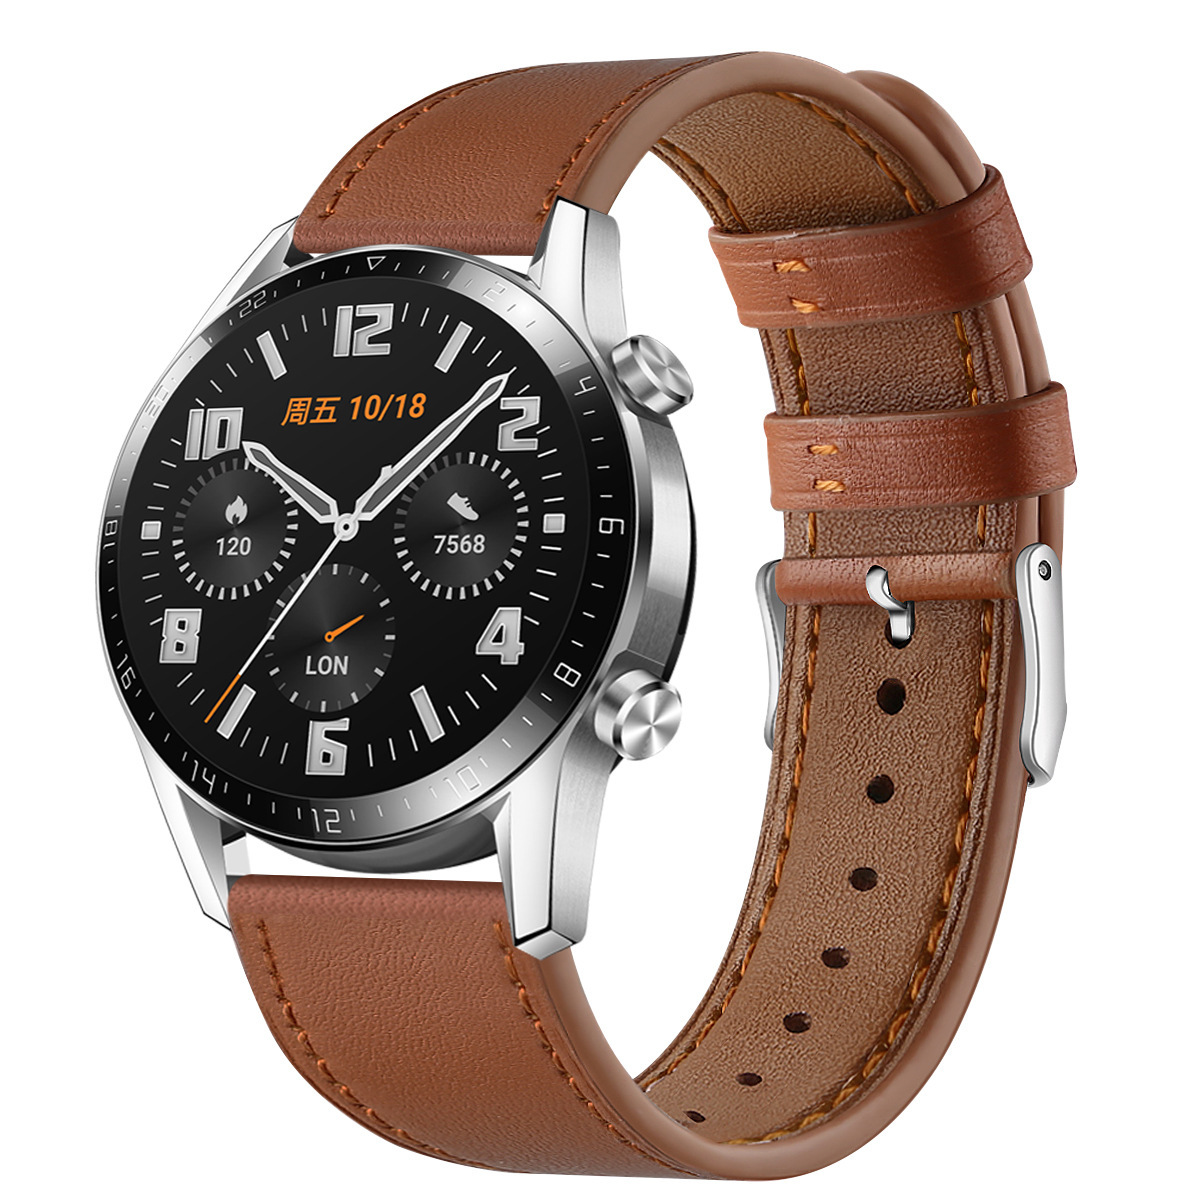 Bakeey-22mm-Replacement-Strap-Genuine-Leather-Smart-Watch-Band-For-Huawei-WATCH-GTGT2-46MM-1656574-4